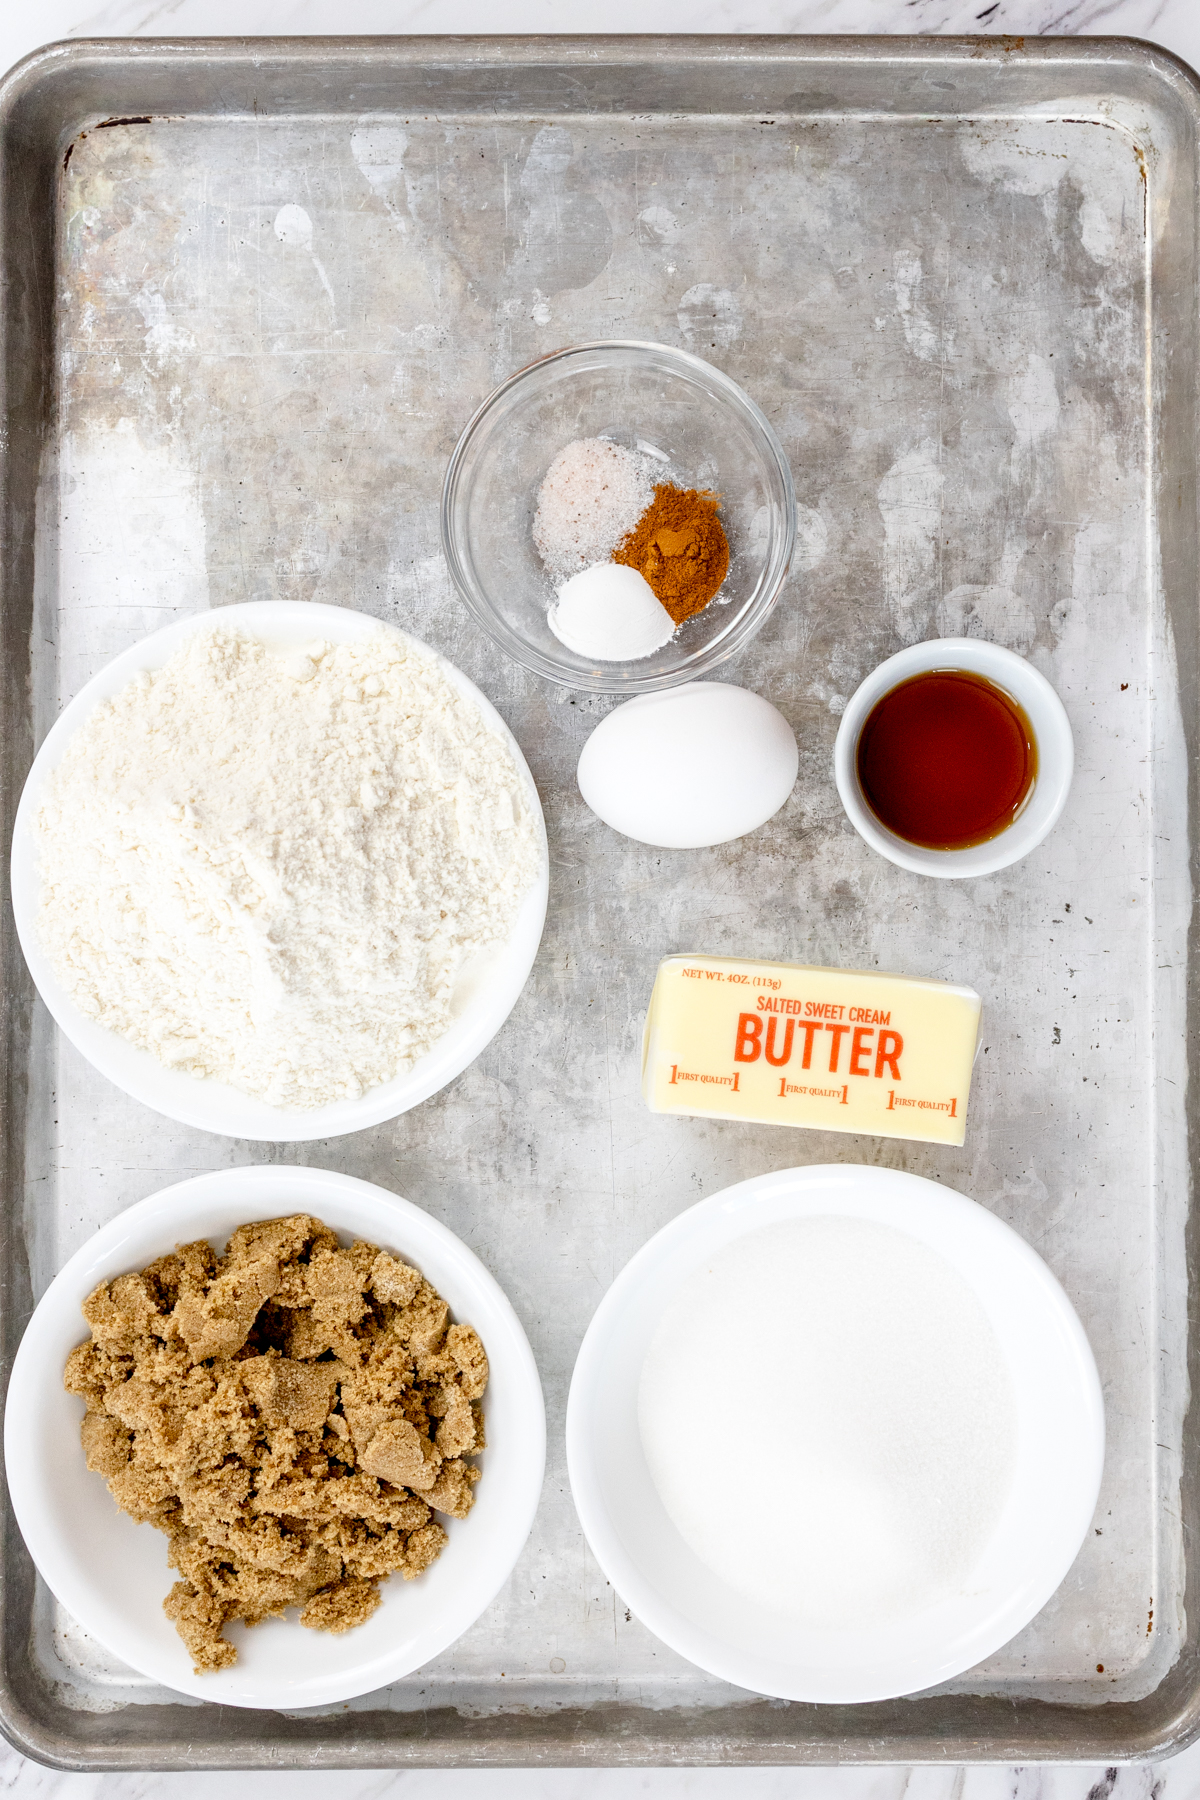 Top view of ingredients needed to make waffle cookies in small bowls on a baking tray.